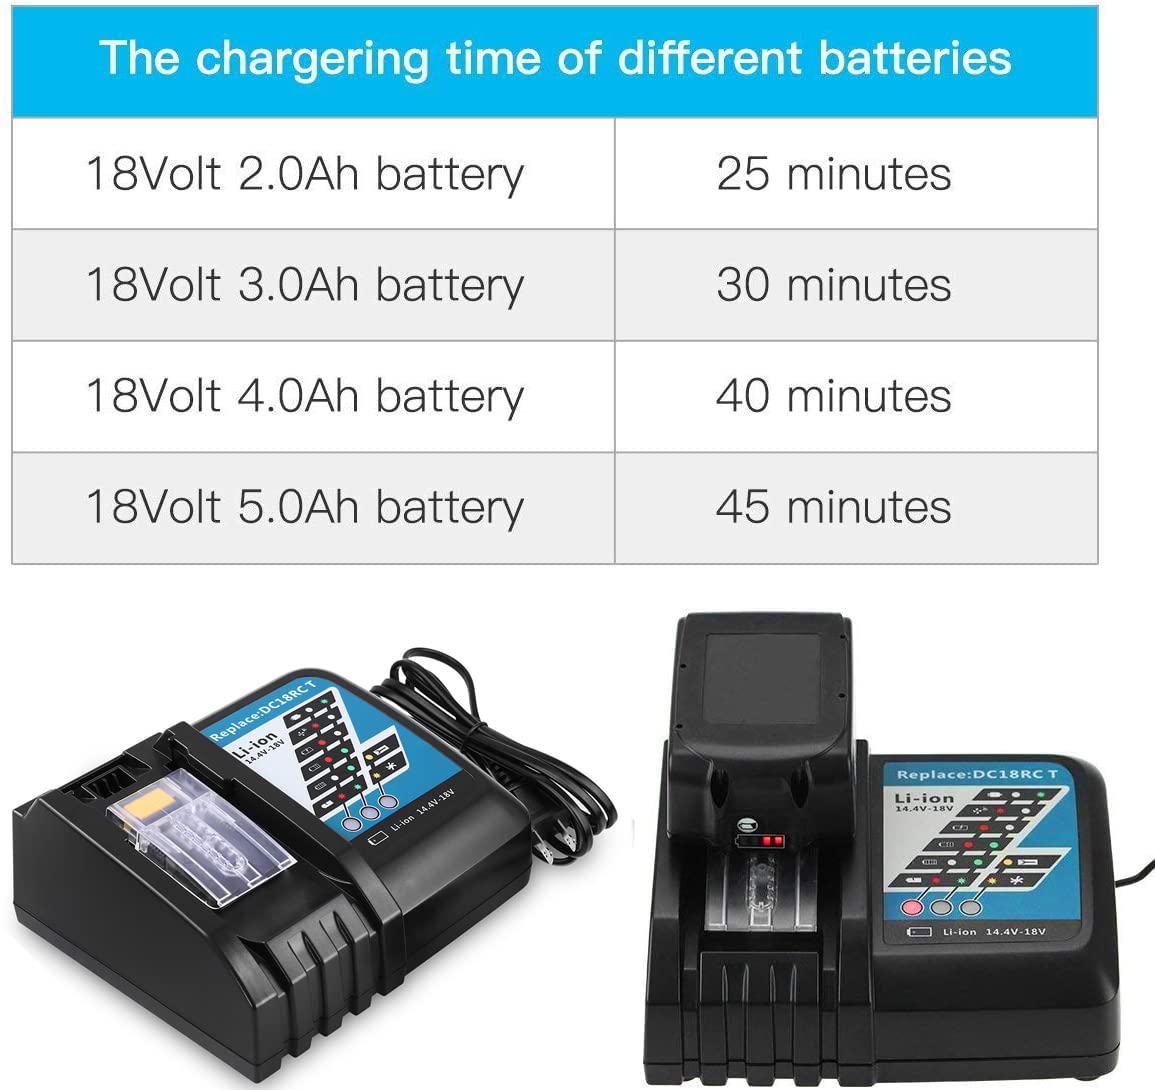 Fast DC18RC Charger Replacement for Makita 14.4V-18V Lithium-ion Battery LXT Compatible with Makita BL1815 BL1830 BL1840 BL1845 BL1850 BL1860 Batteries Charger